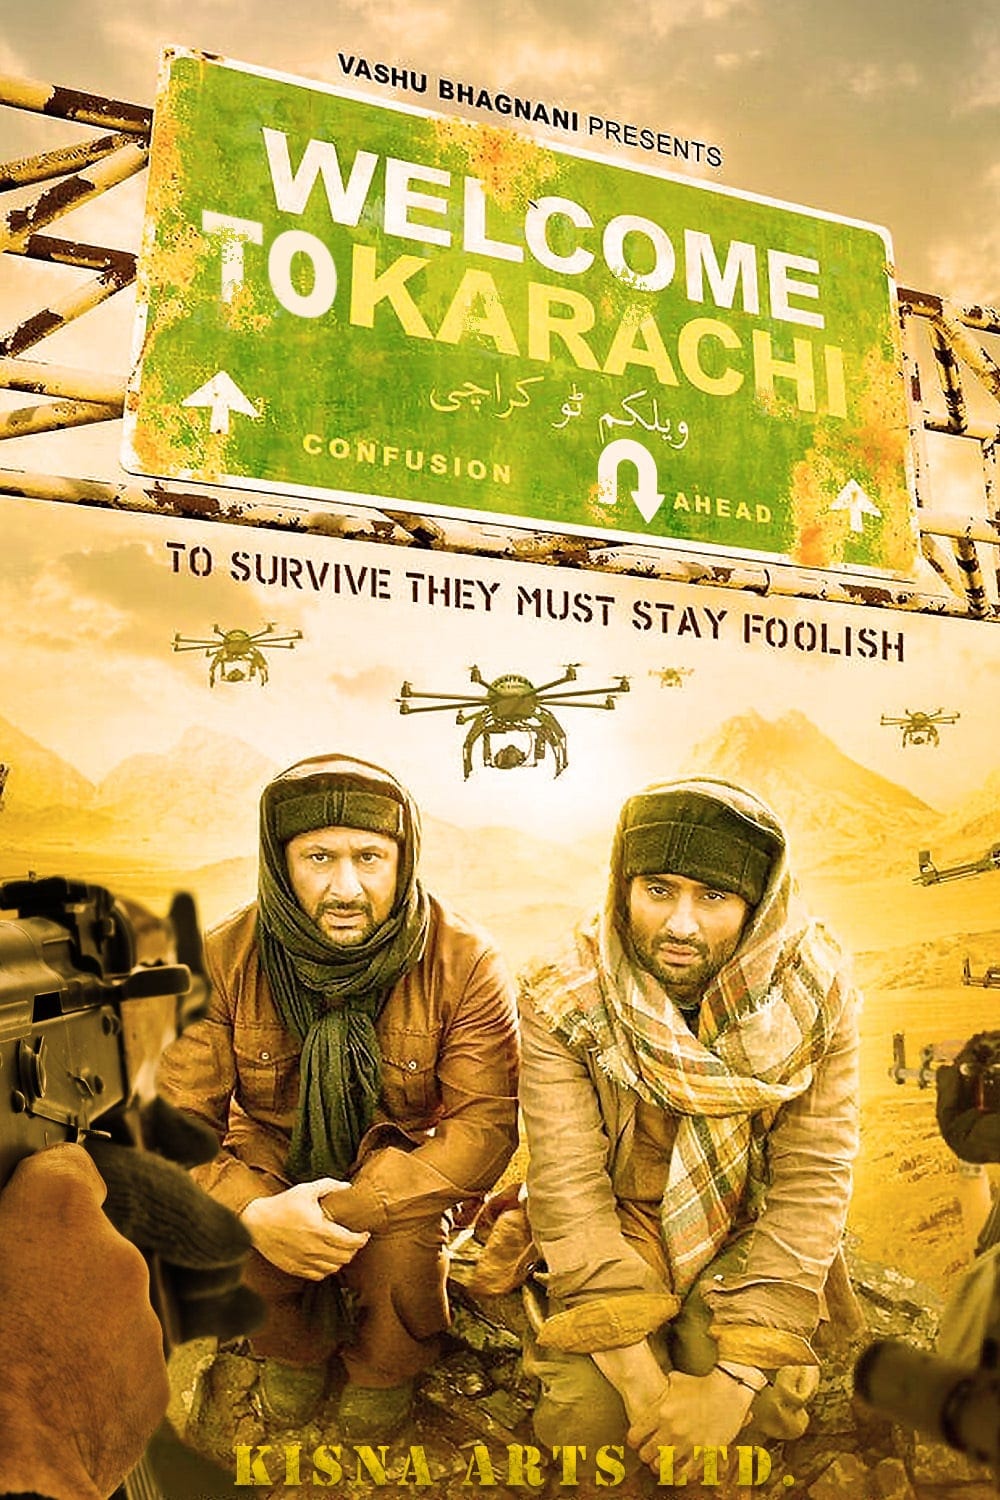 Poster for the movie "Welcome 2 Karachi"